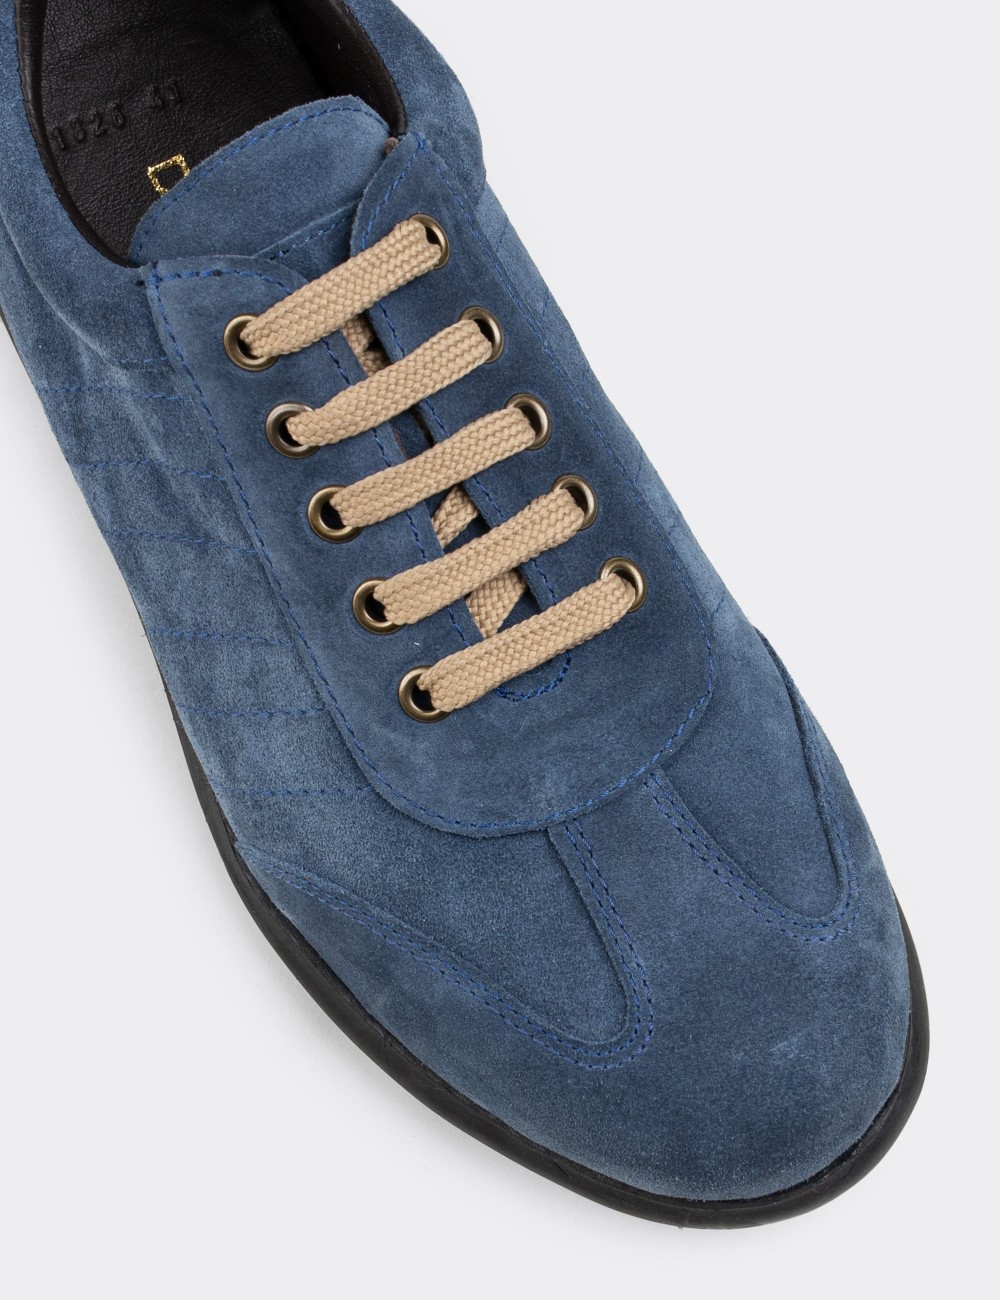 Blue Suede Leather Lace-up Shoes - 01826MMVIC08